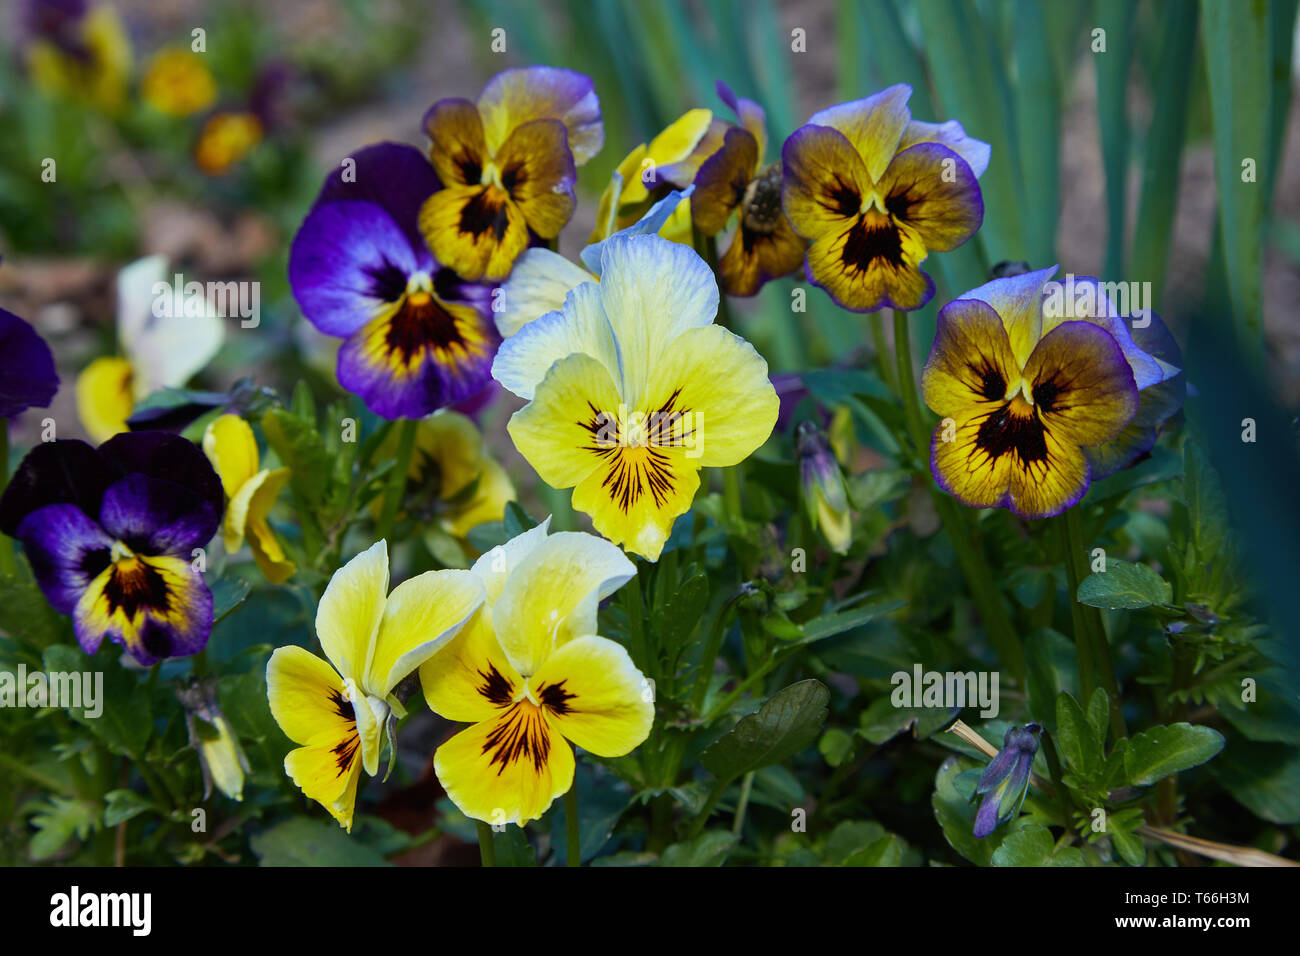 Closeup of colorful pansy flower, The garden pansy is a type of large-flowered hybrid plant cultivated as a garden flower. Stock Photo